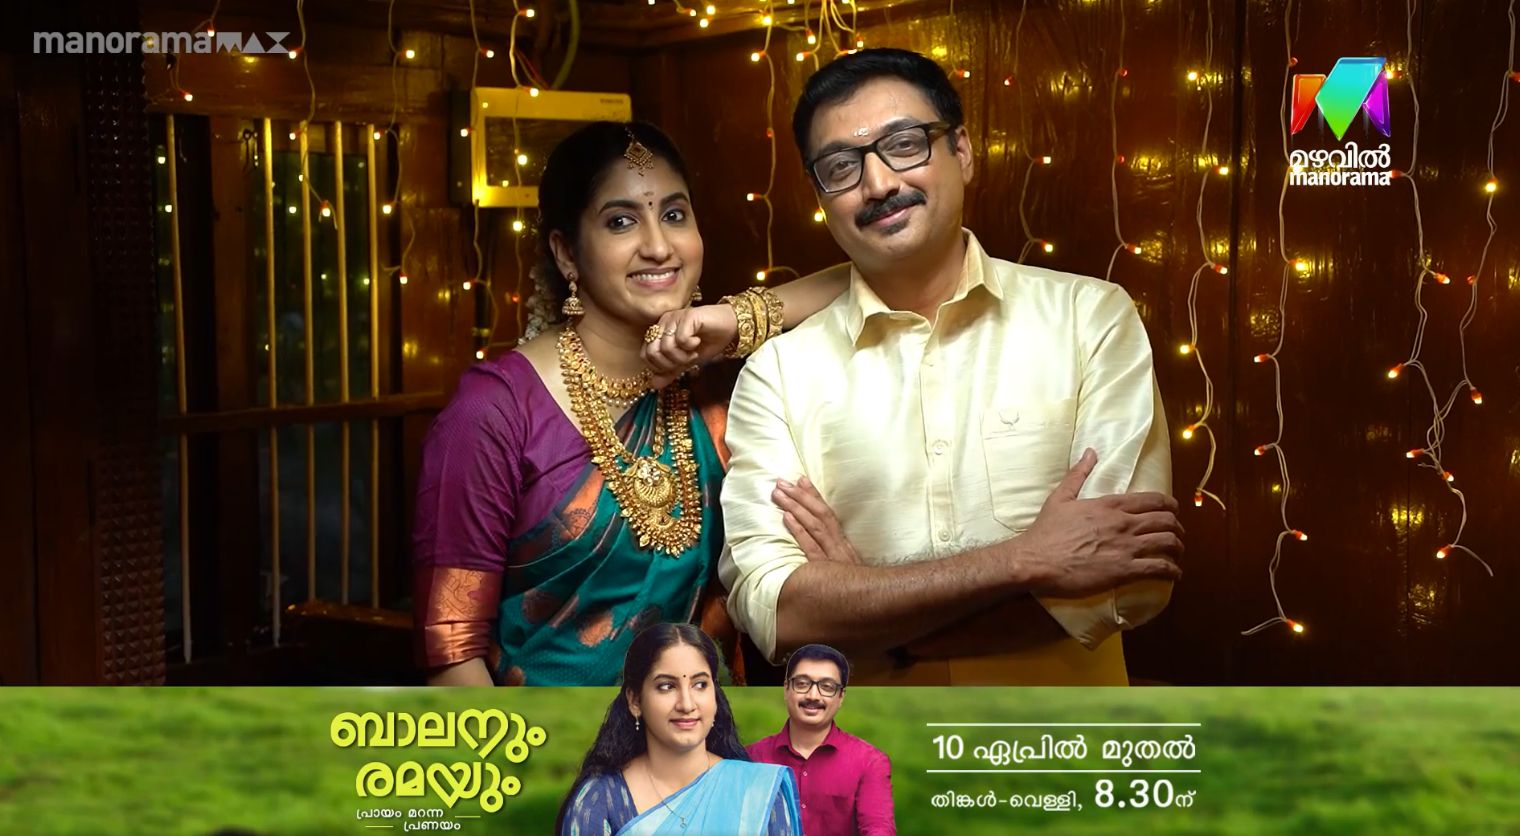 Makkal malayalam television serial coming soon on mazhavil manorama channel 5